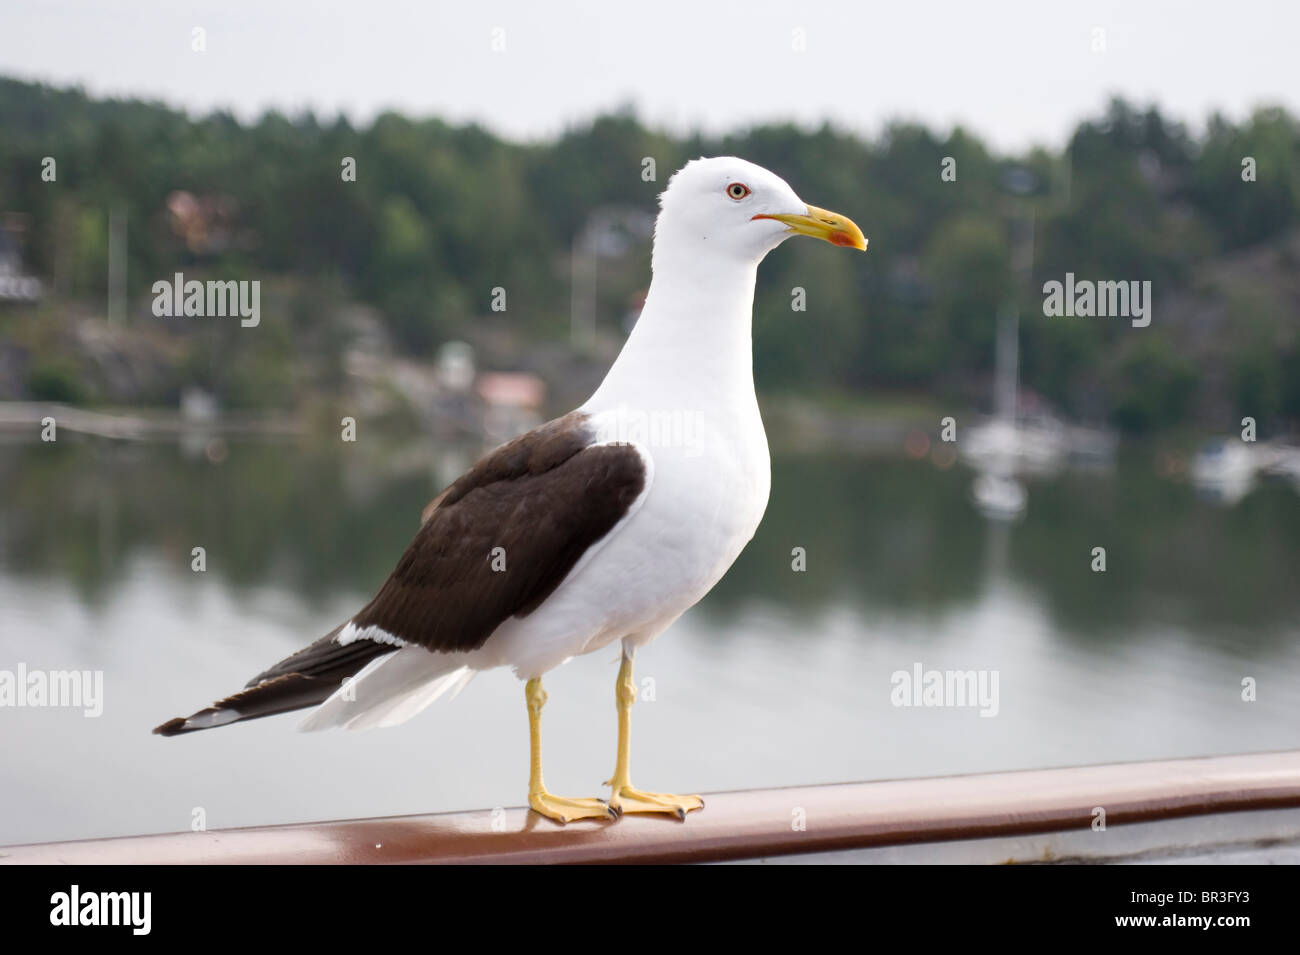 Seagull standing on the ferry handrail Stock Photo